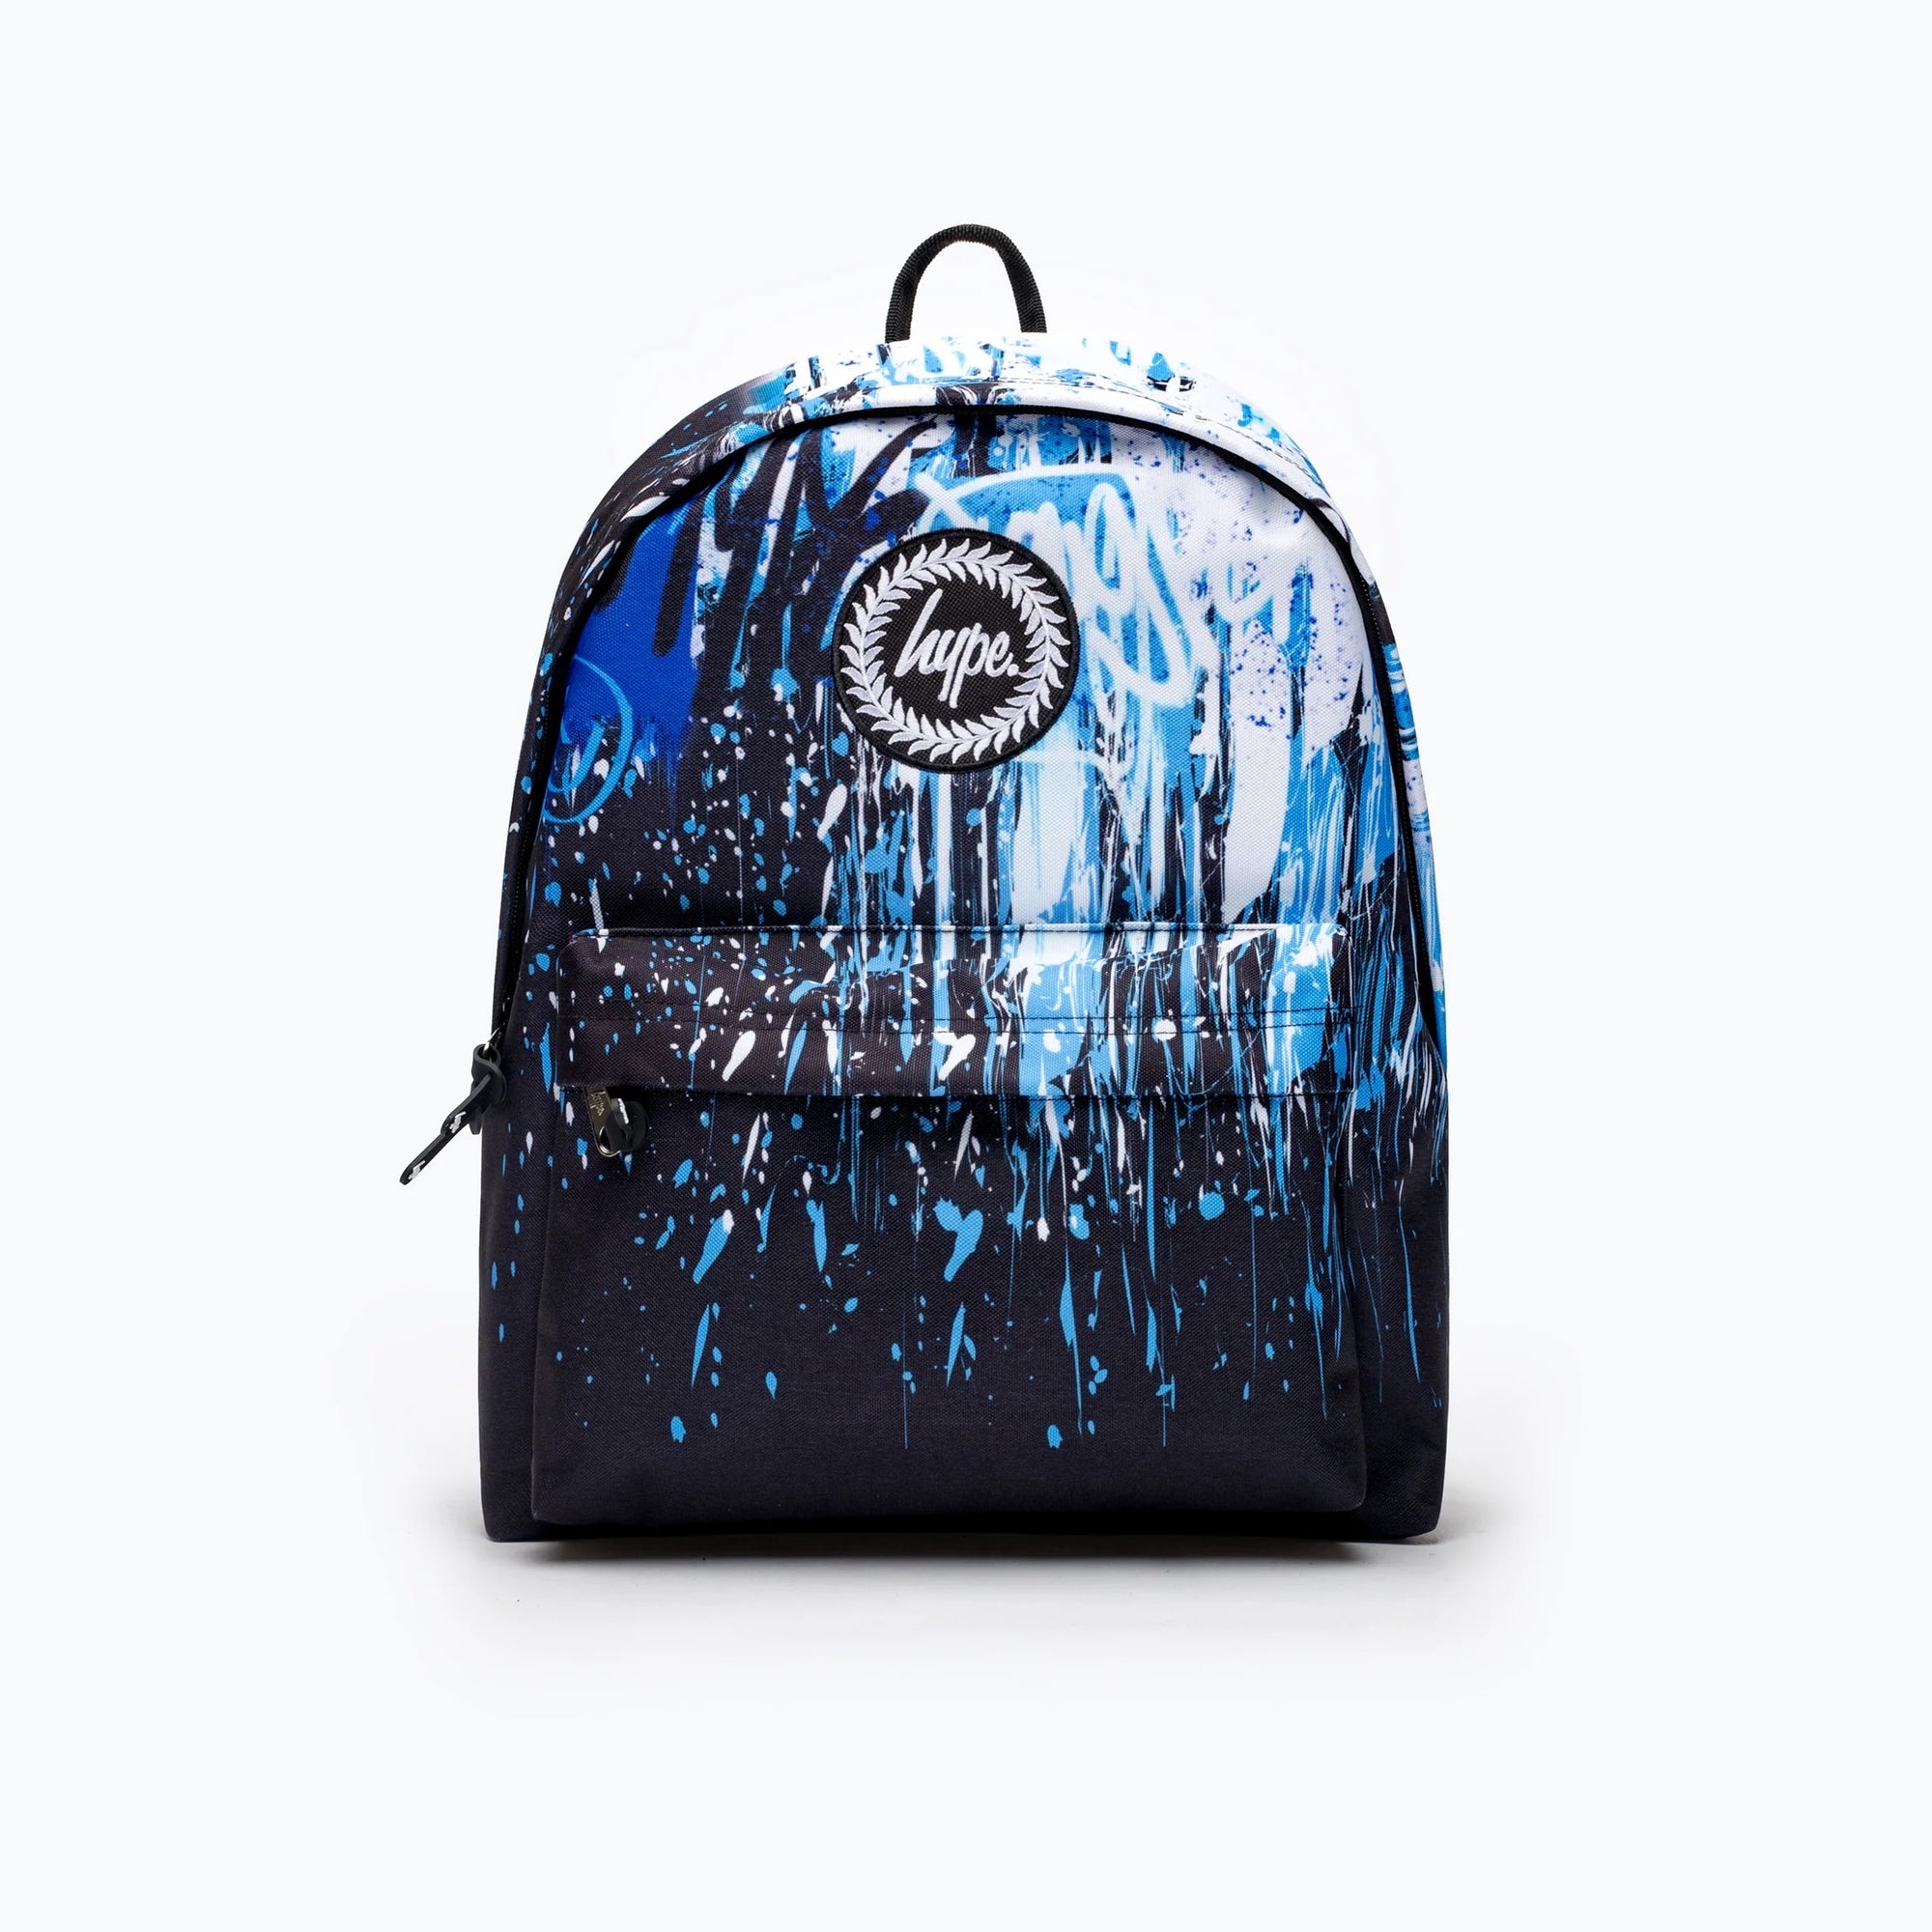 Hype Graffiti Drip Backpack Yucb096 Accessories ONE SIZE / Black